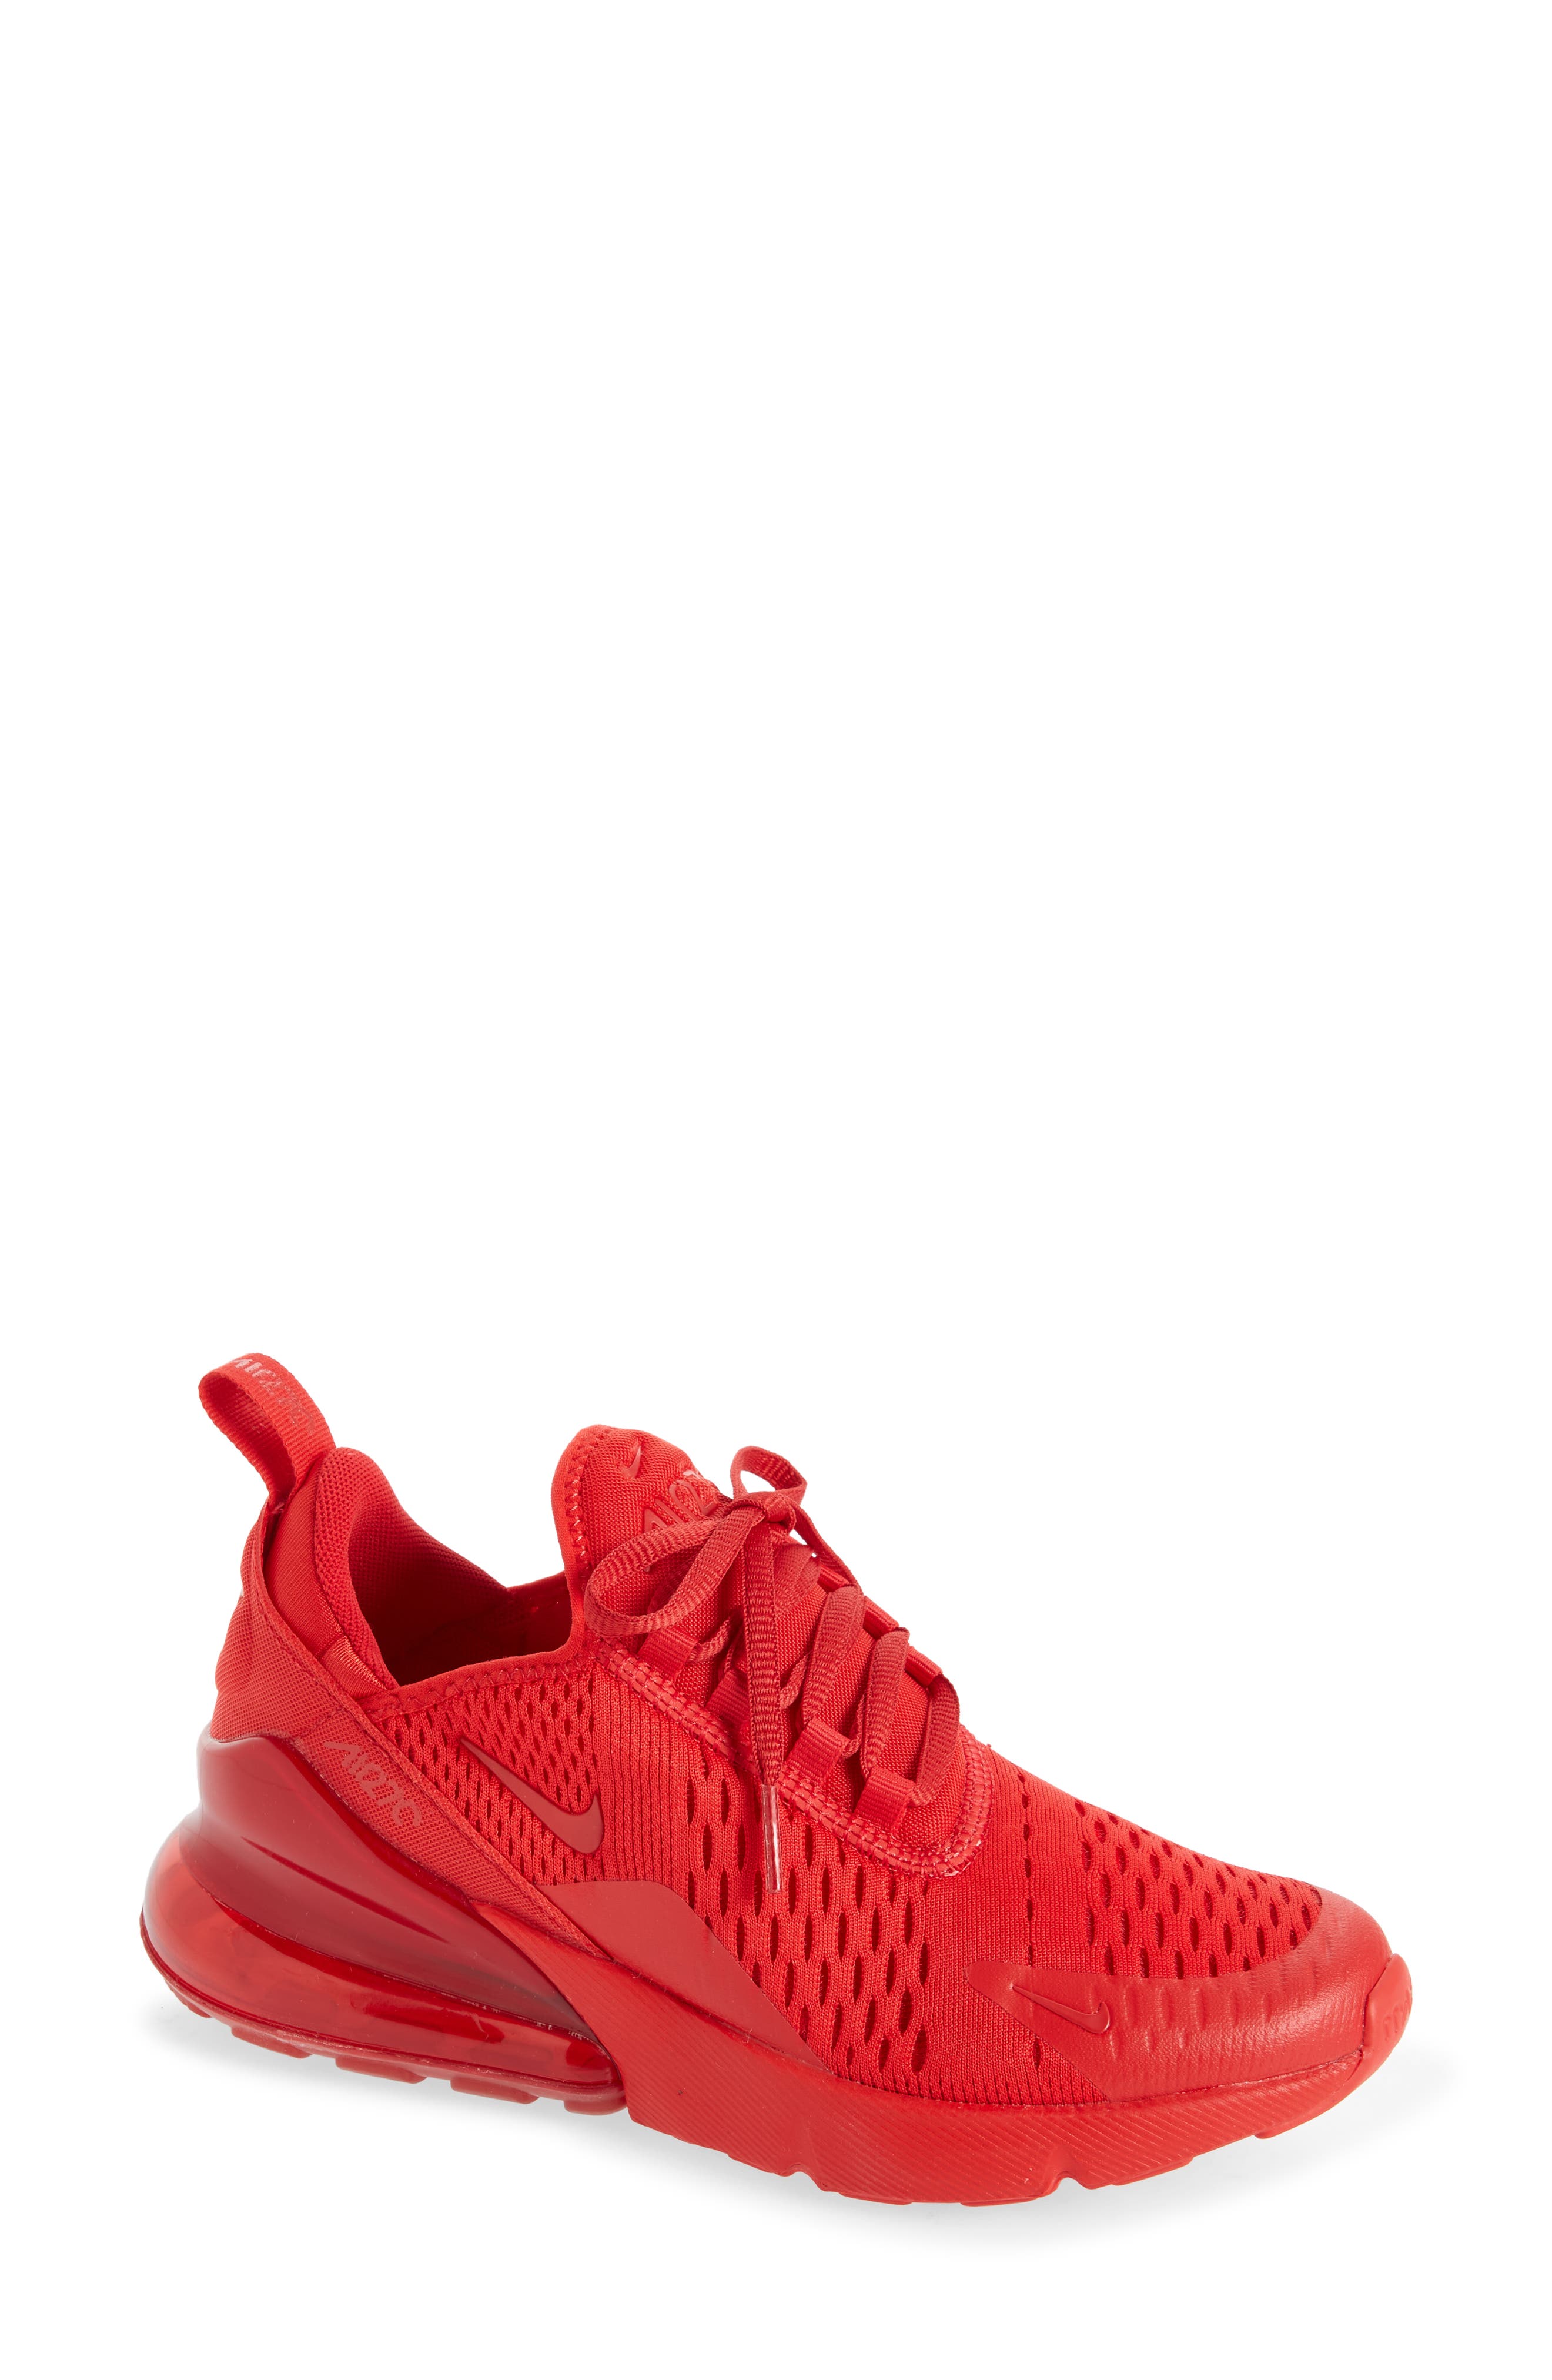 nike new red shoes